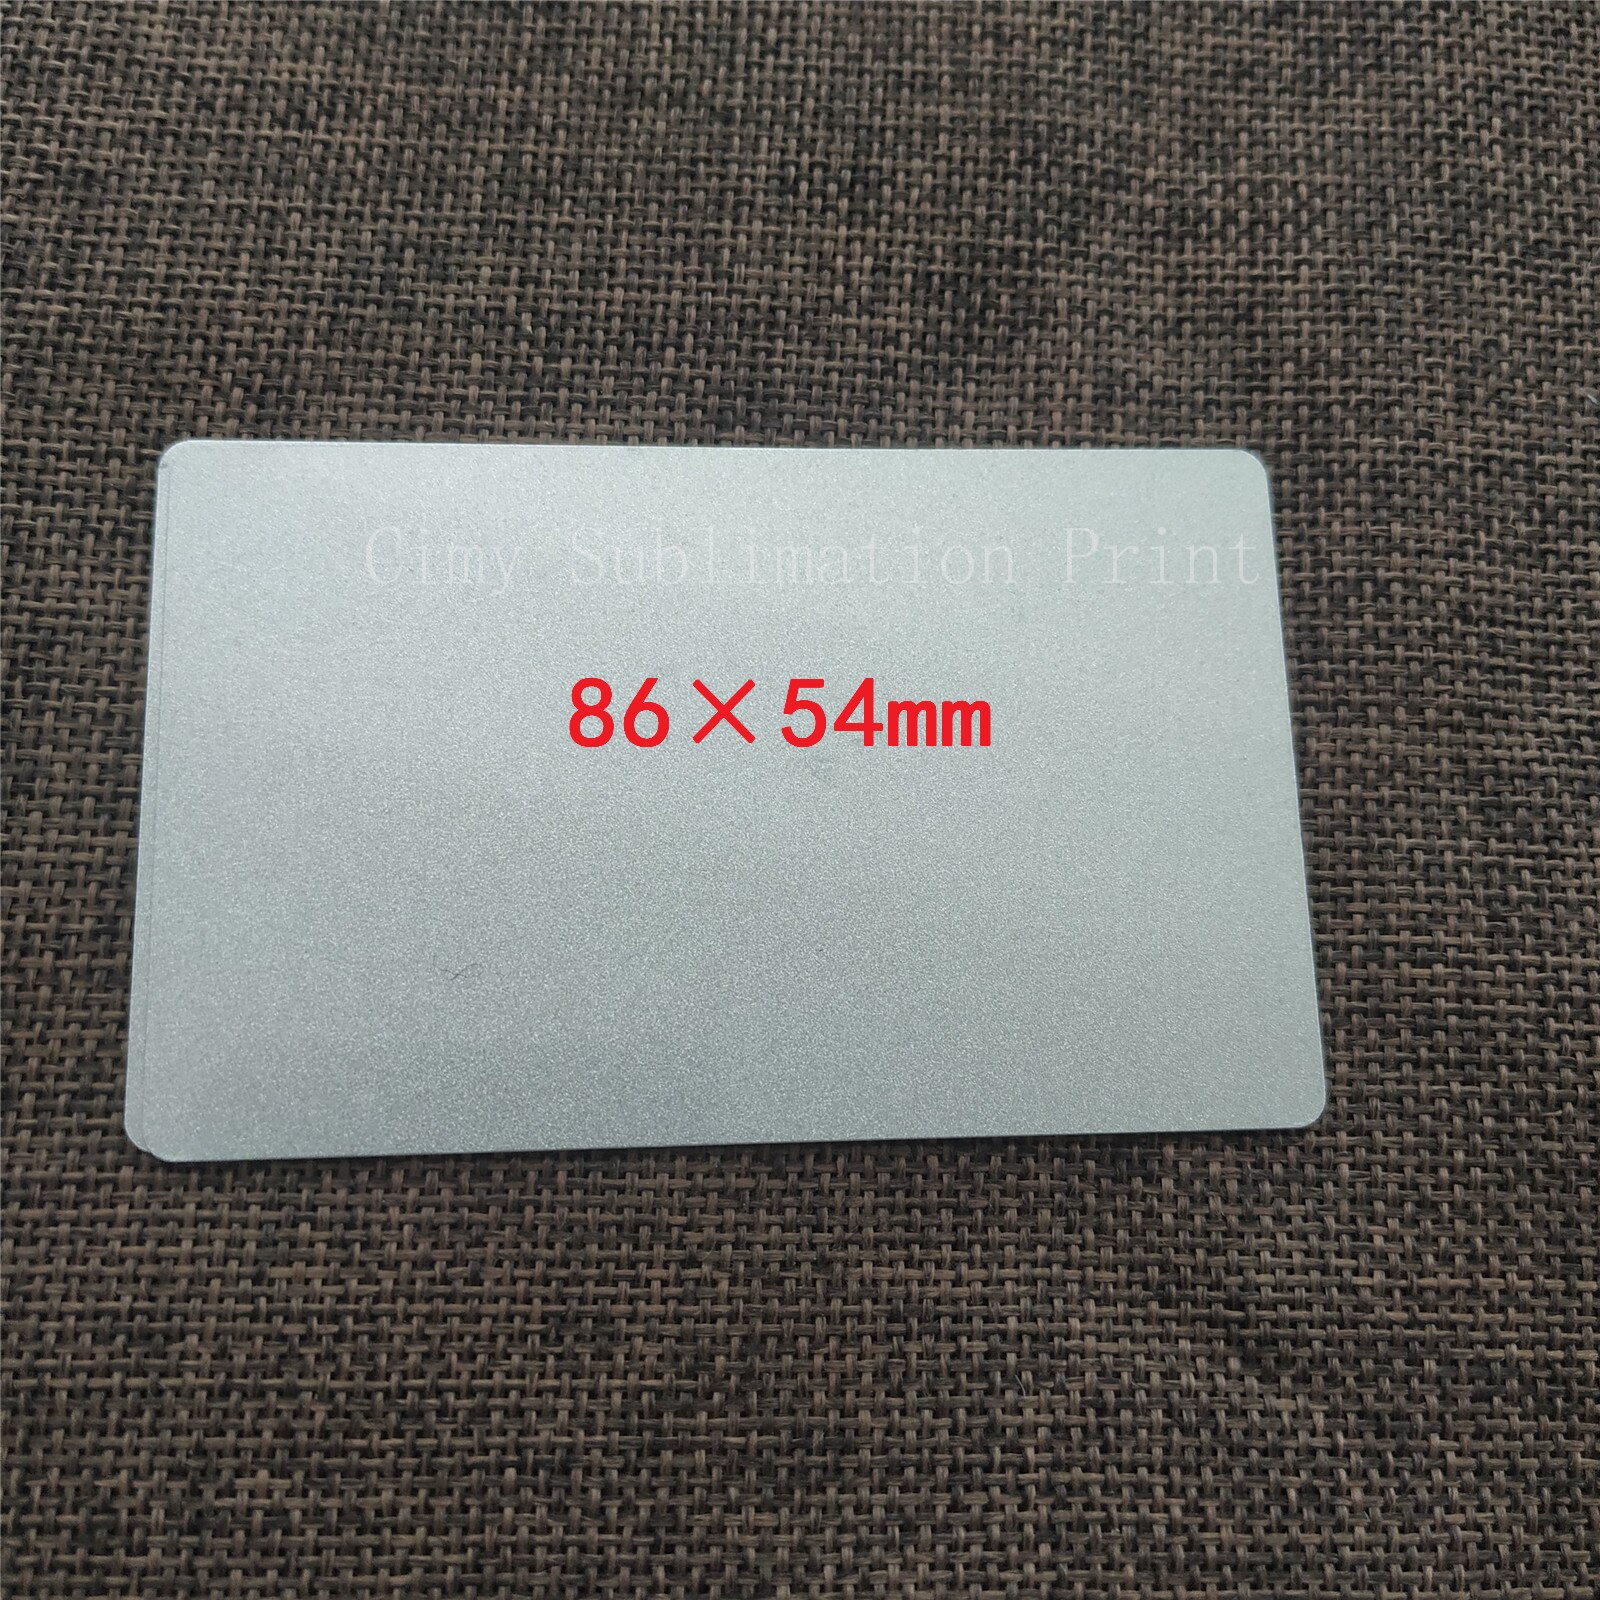 100sheets 0.45mm 86*54mm Blank Sublimation Metal Plate Aluminium sheet Name Card Printing Sublimation Ink Transfer DIY Craft: Pearl Silver